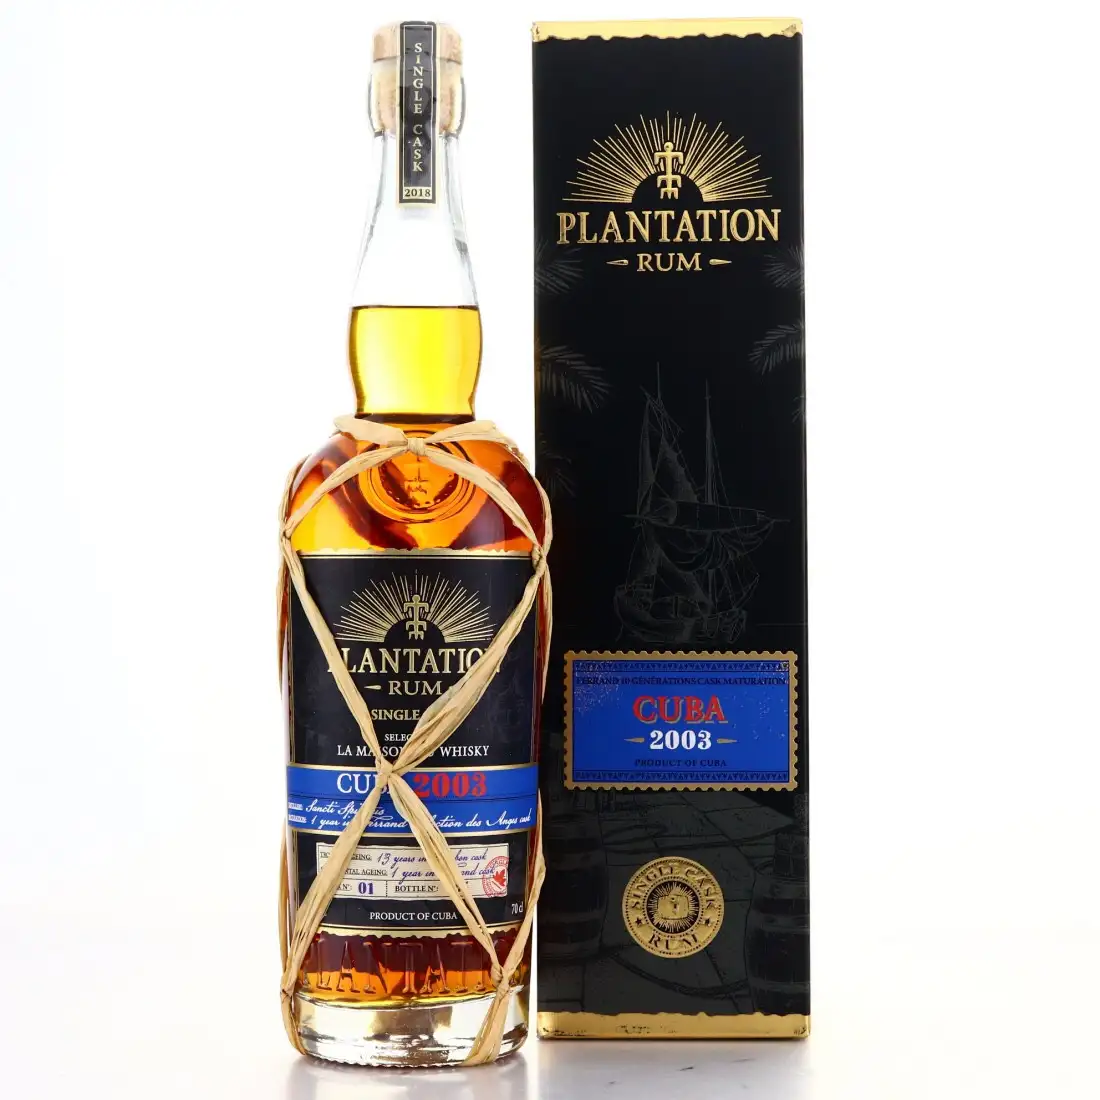 Image of the front of the bottle of the rum Plantation Single Cask Cuba LMDW